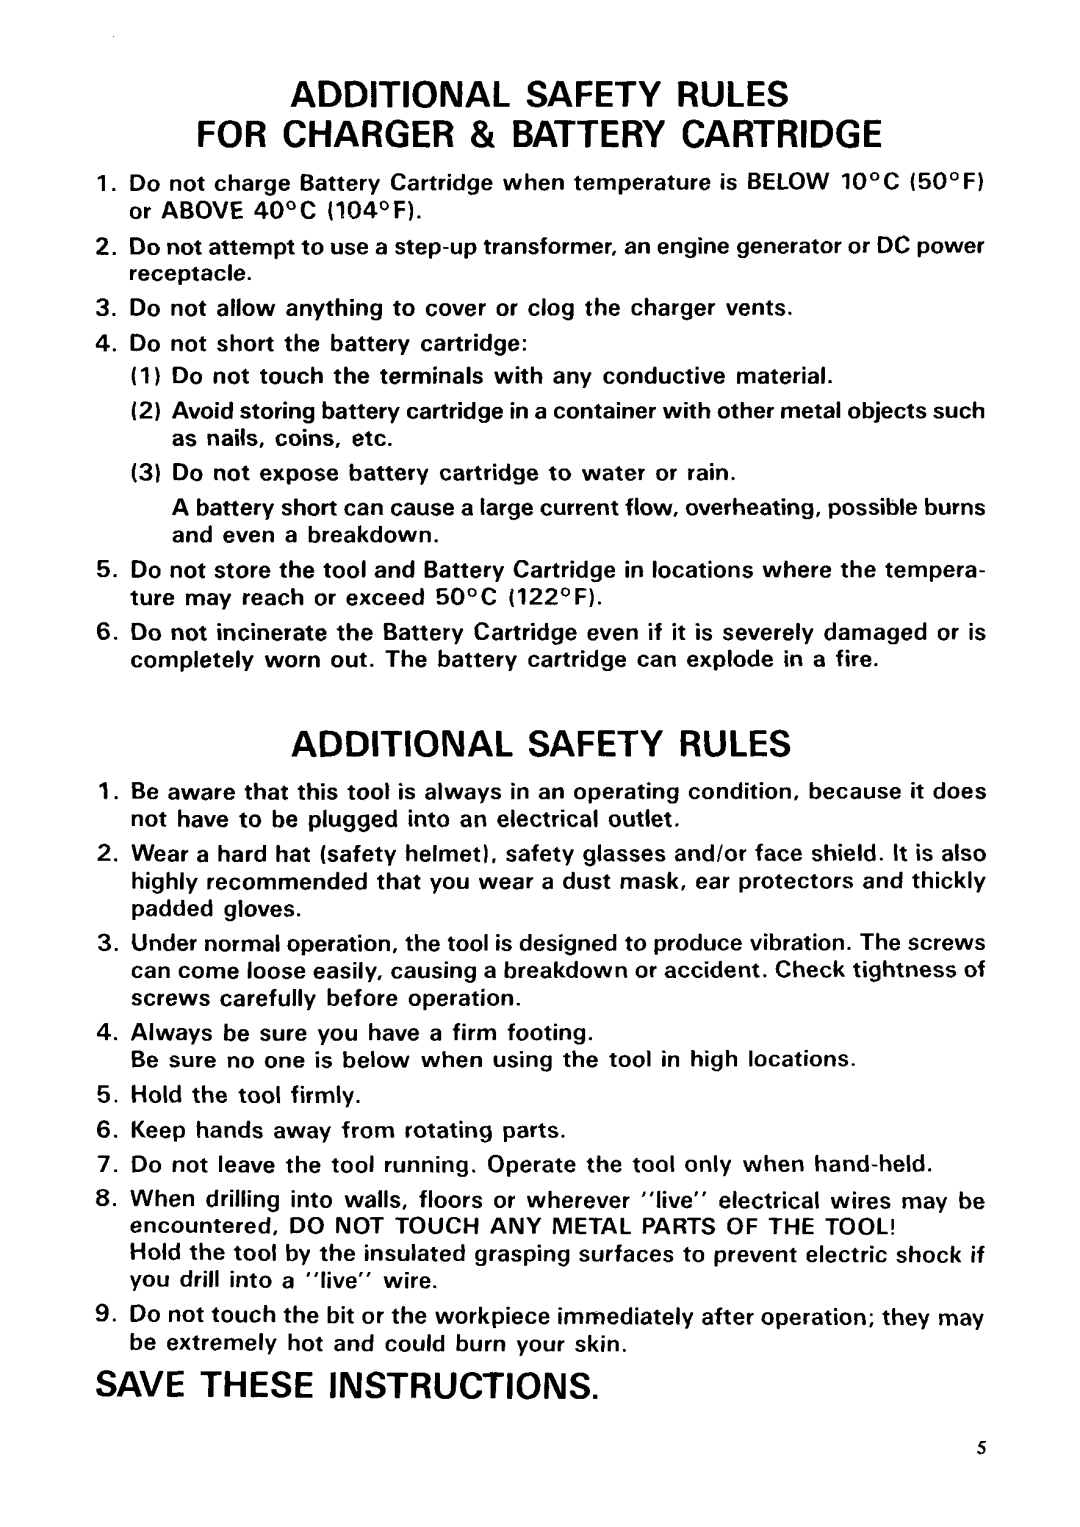 Makita 8402VDW instruction manual Additional Safety Rules For Charger & Battery Cartridge, Save These Instructions 